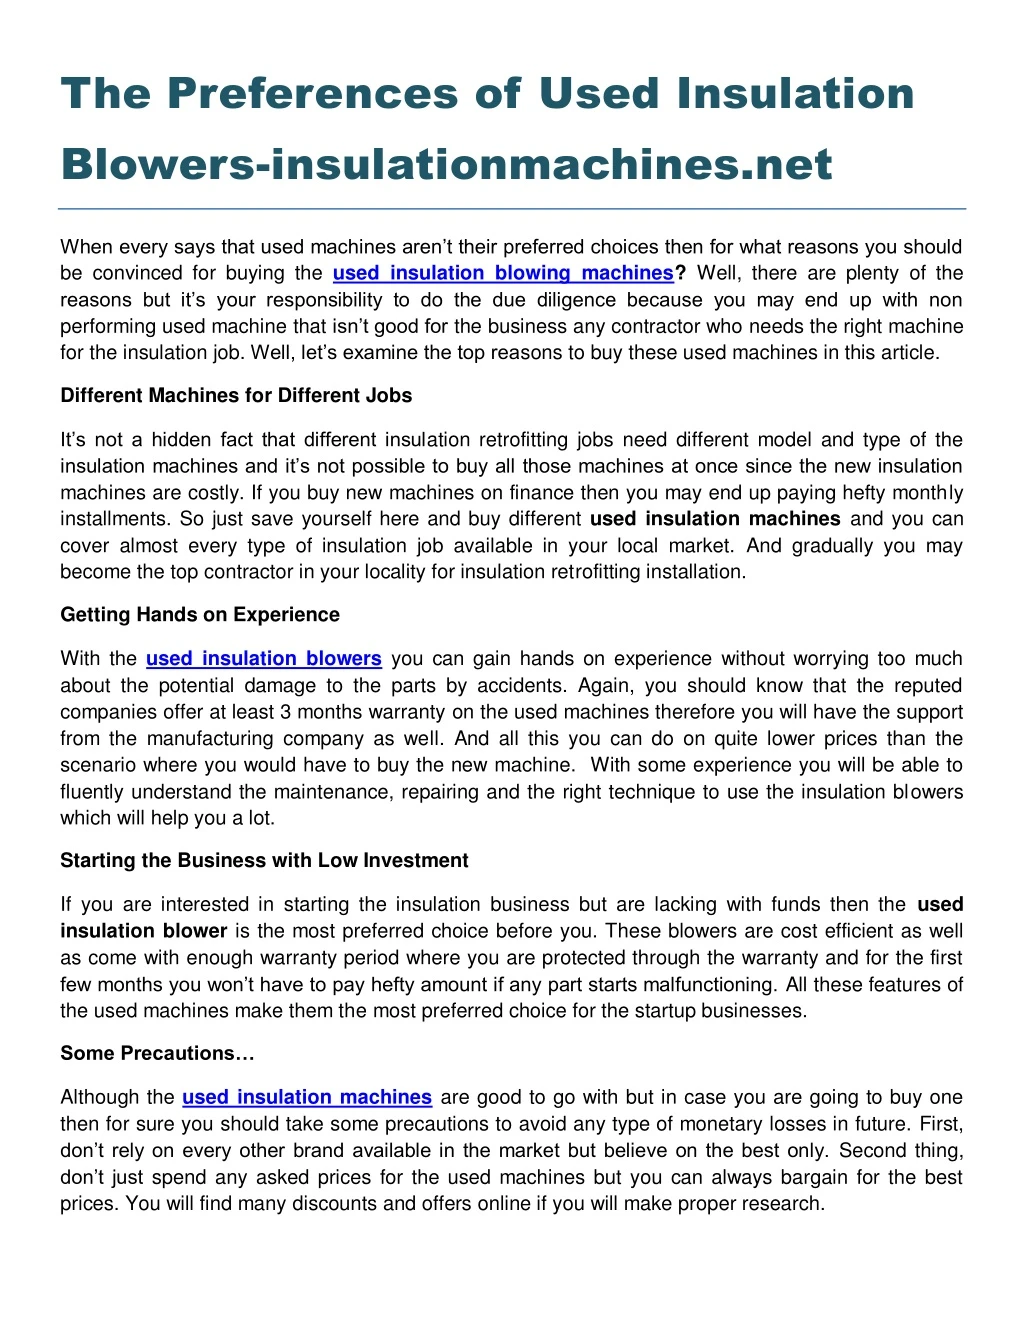 the preferences of used insulation blowers